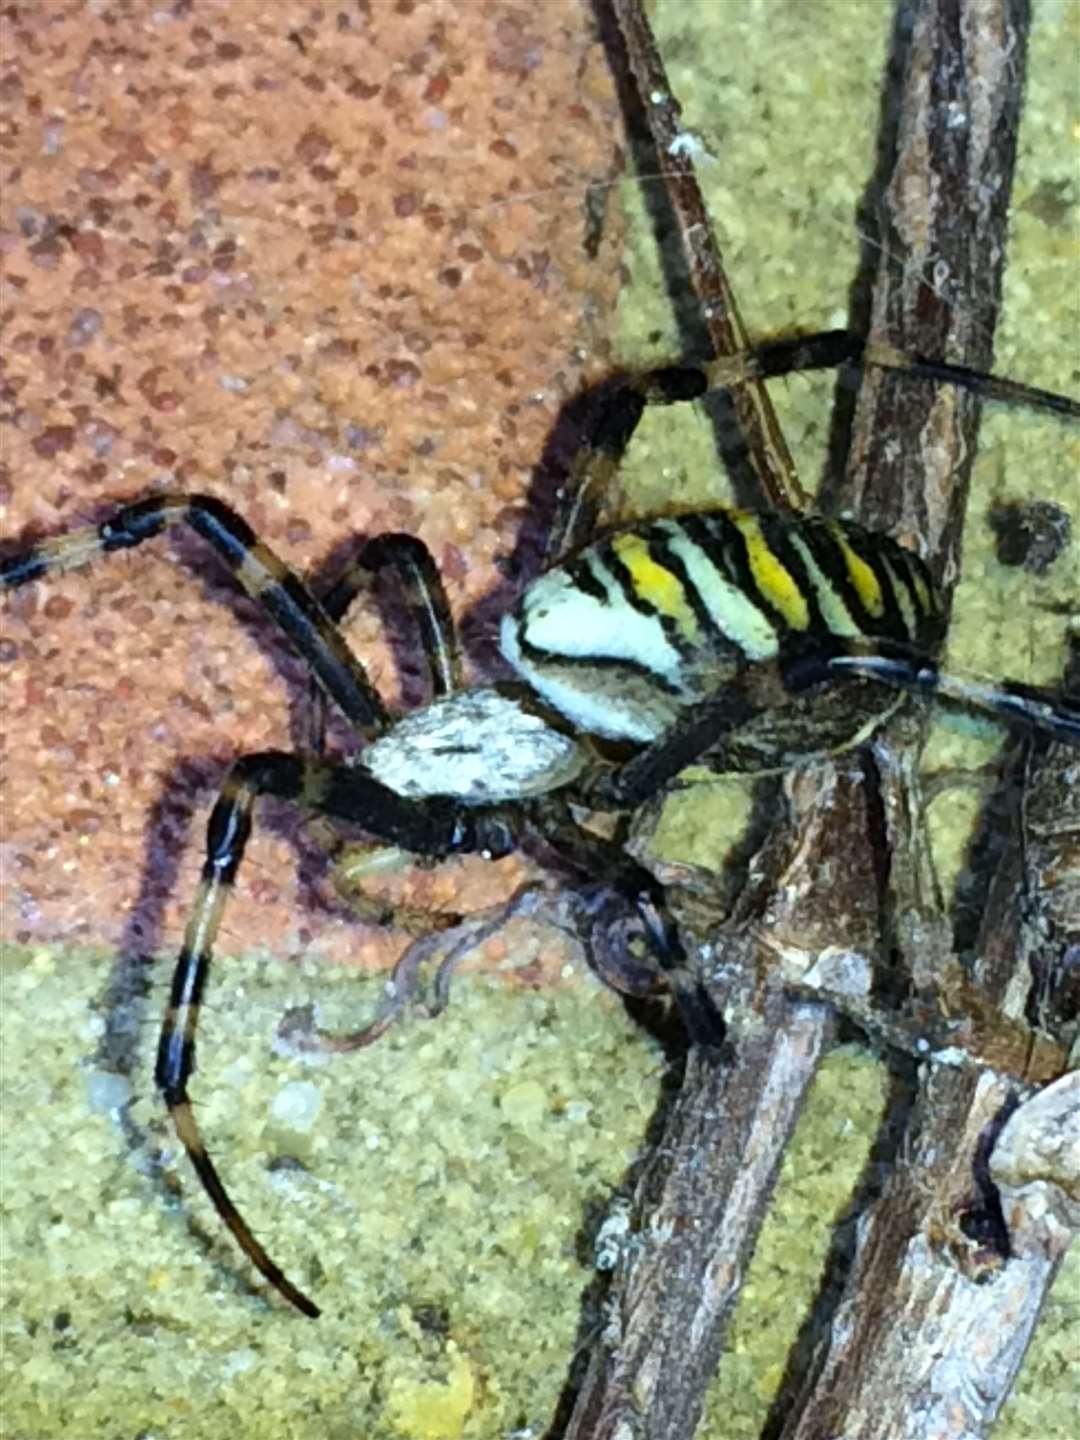 The spider had unusual markings on its back.